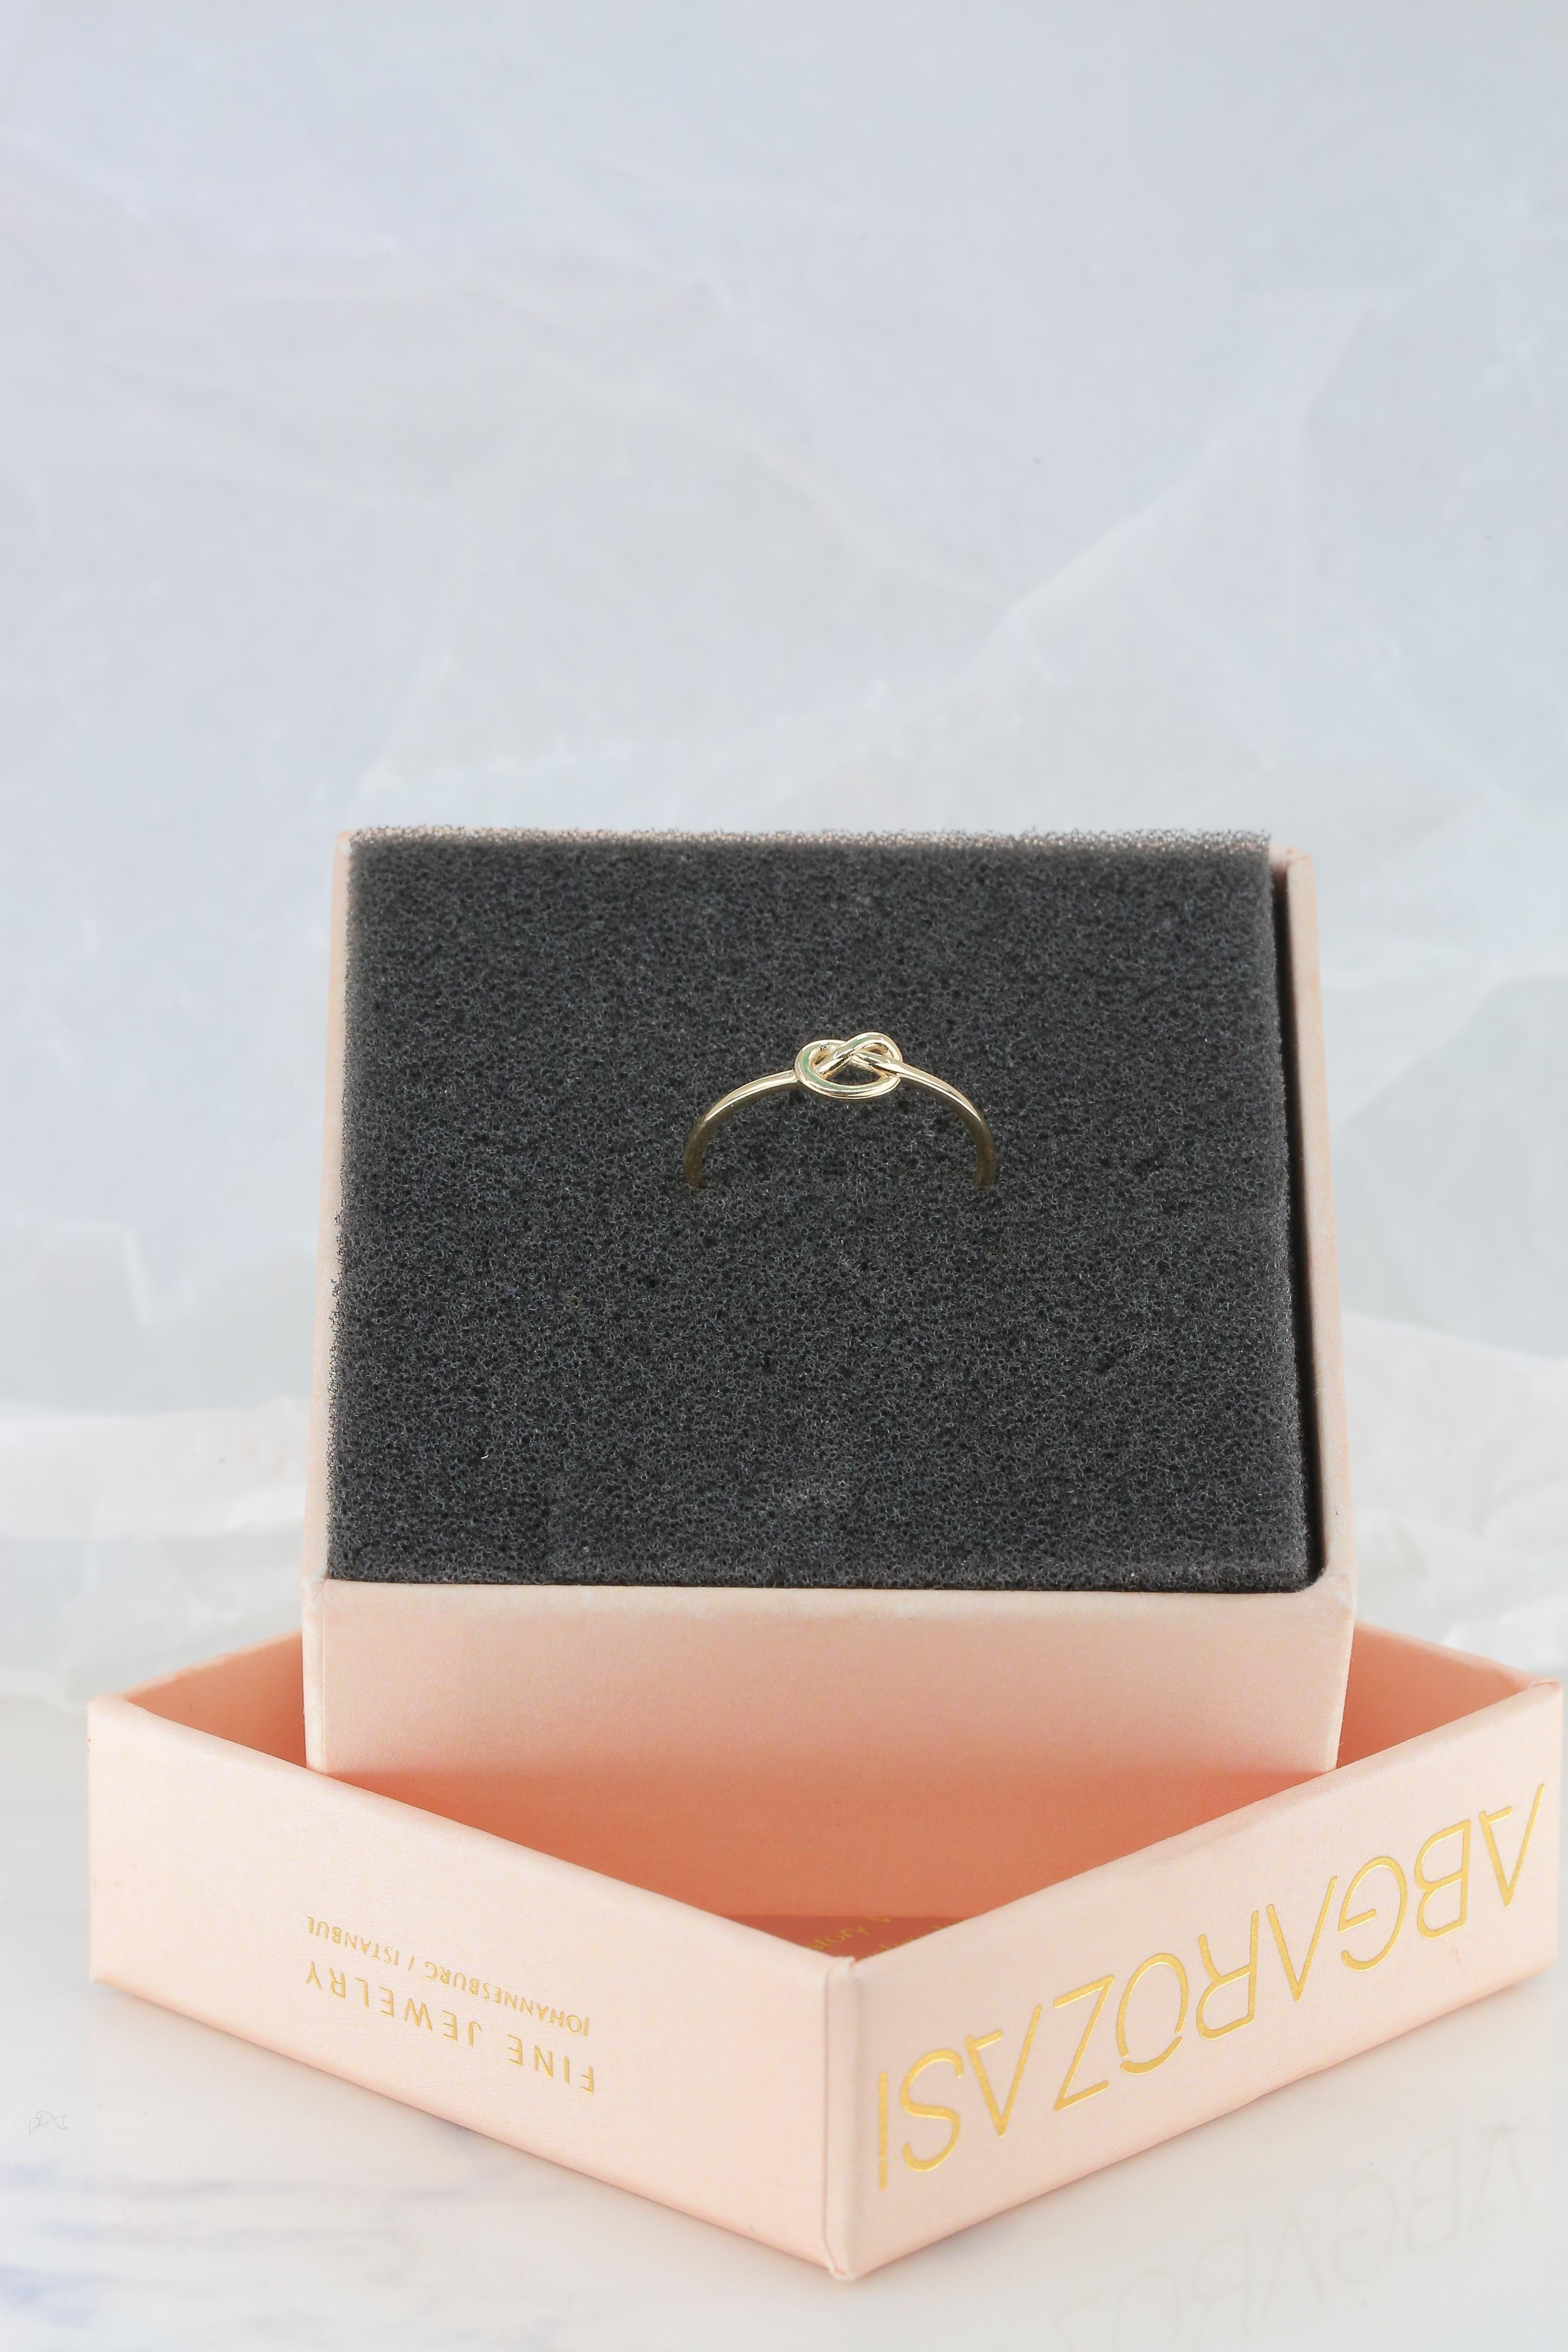 For Sale:  Gold Knot Ring, 14k Solid Gold, Dainty Ring, Minimalist Style Ring 8